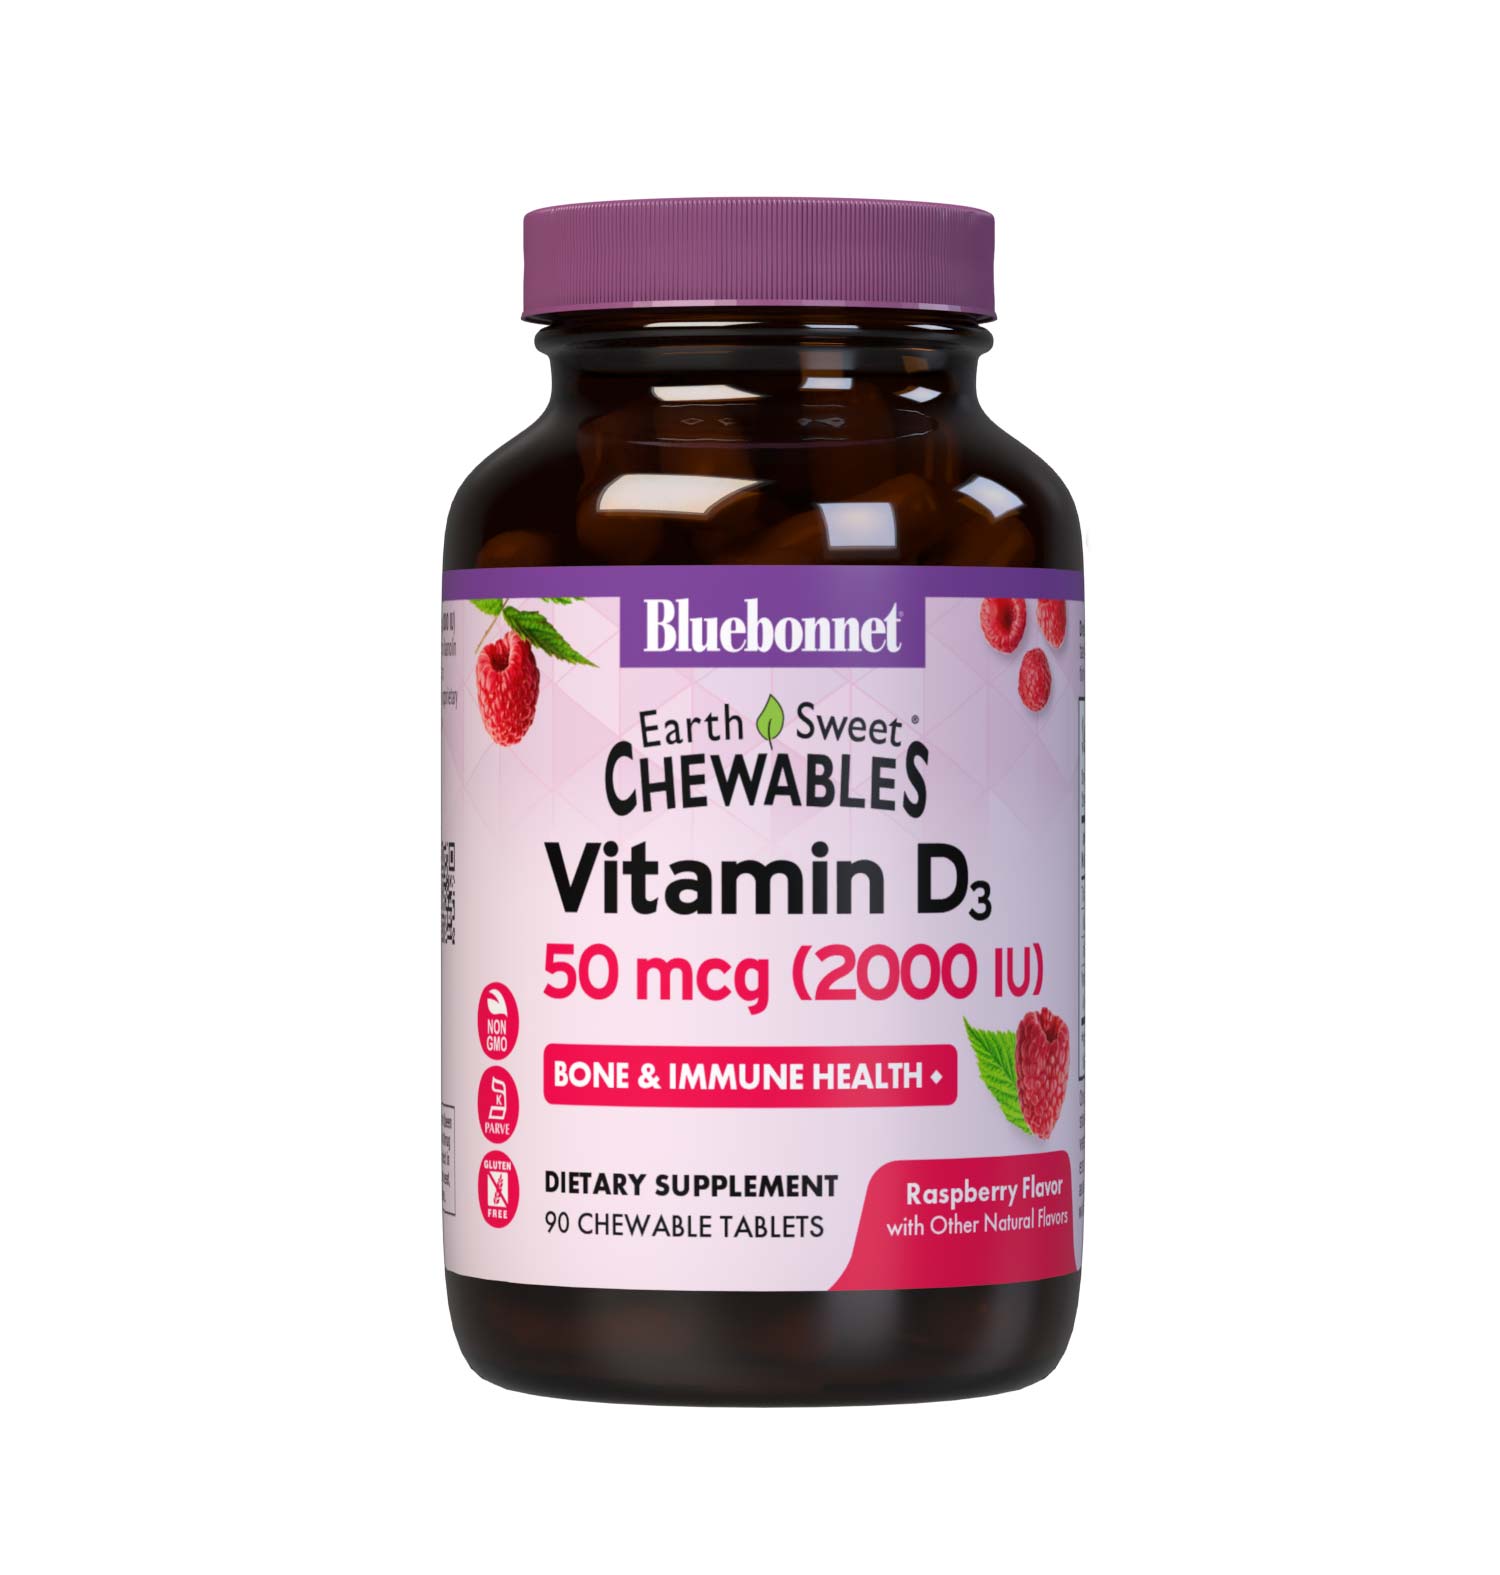 Bluebonnet’s EarthSweet Chewables Vitamin D3 50 mcg (2000 IU) 90 Chewable Tablets are formulated with vitamin D3 (cholecalciferol) from lanolin that supports strong bones and immune function in a delicious raspberry flavor. #size_90 count